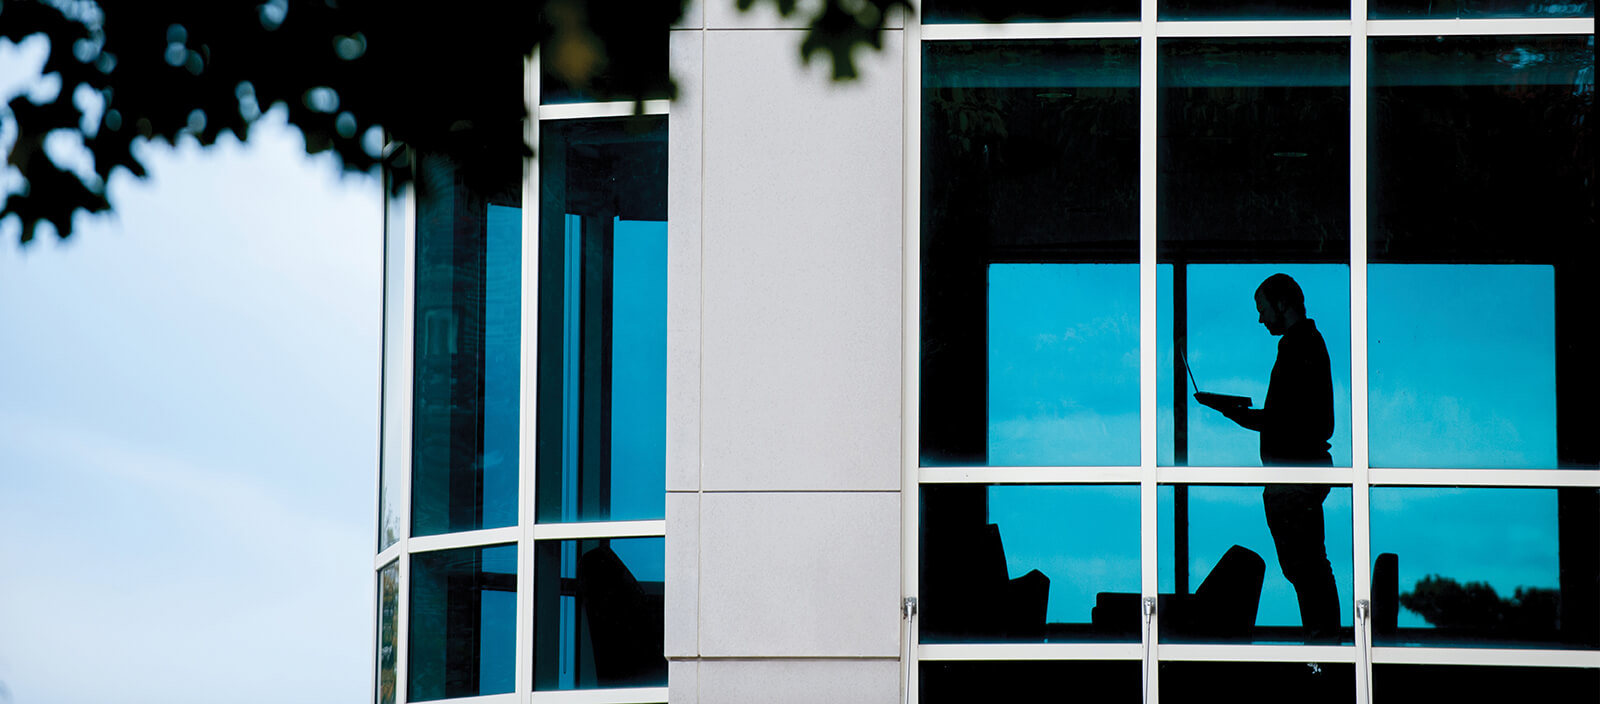 A silhouette of a student reading inside a campus building